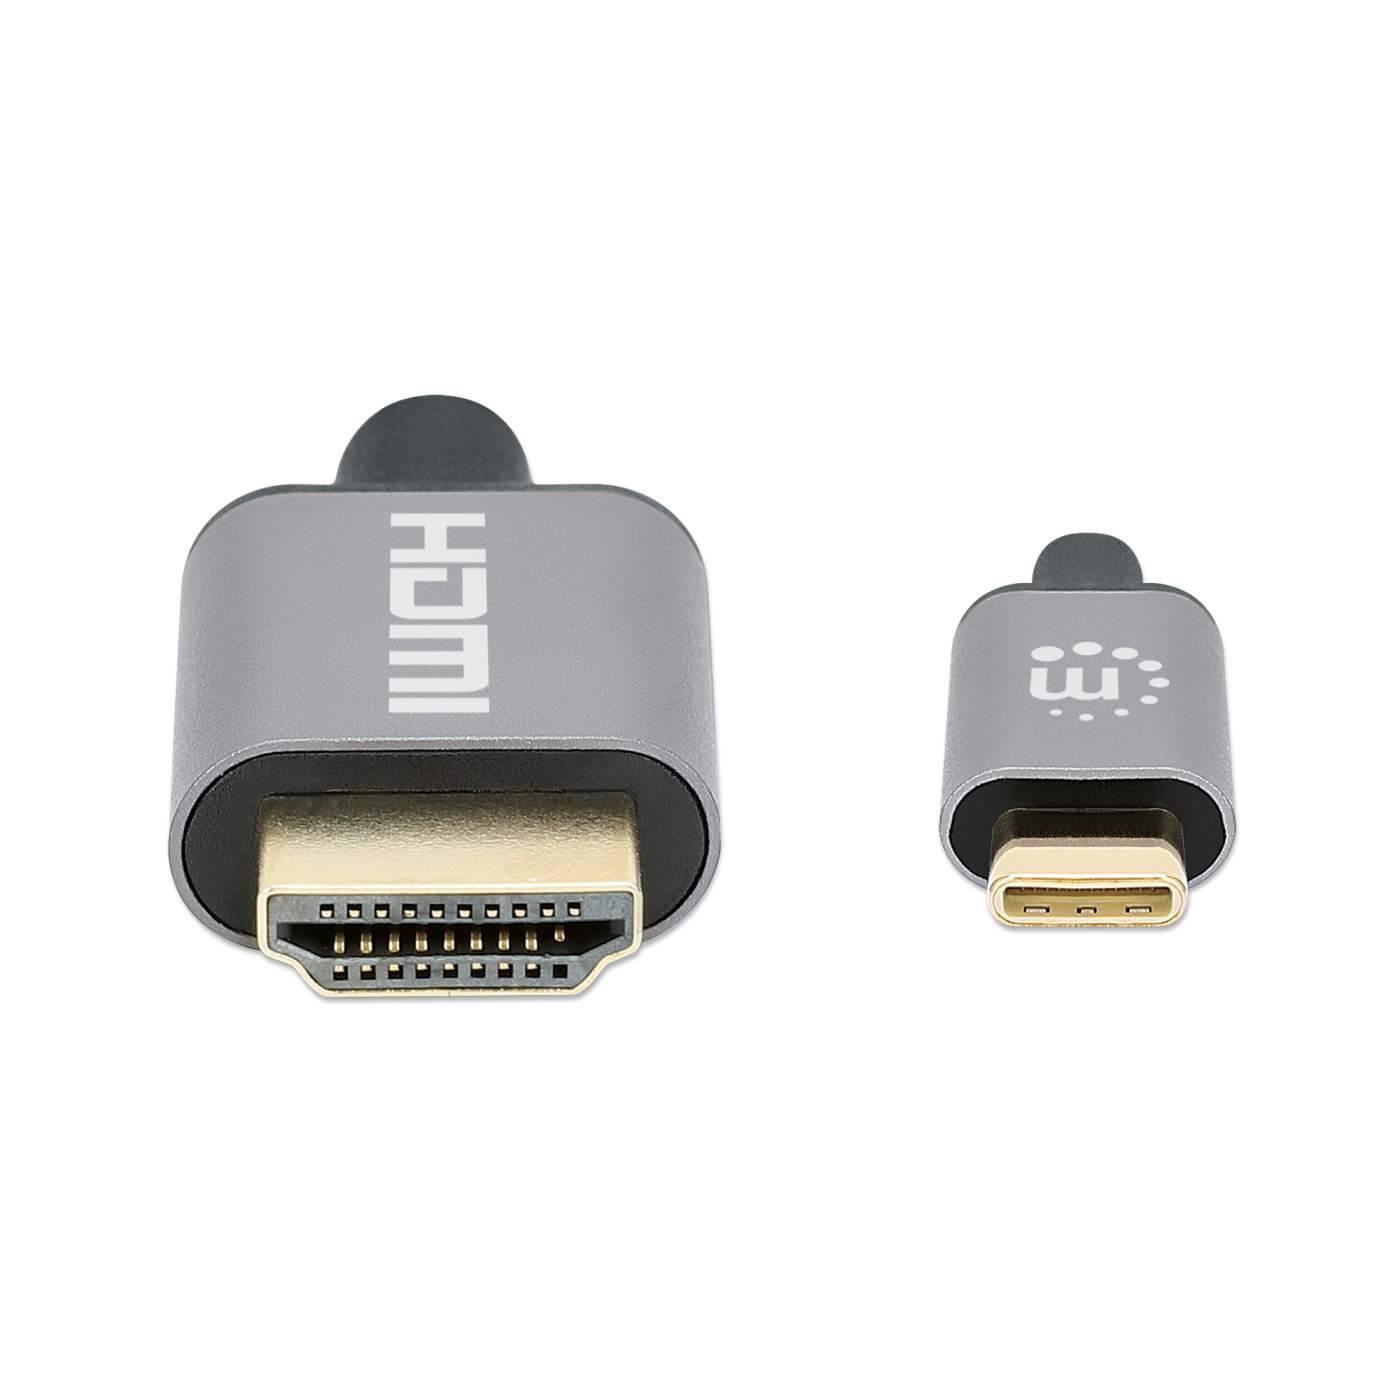 Manhattan USB-C to HDMI Adapter Cable (152235)